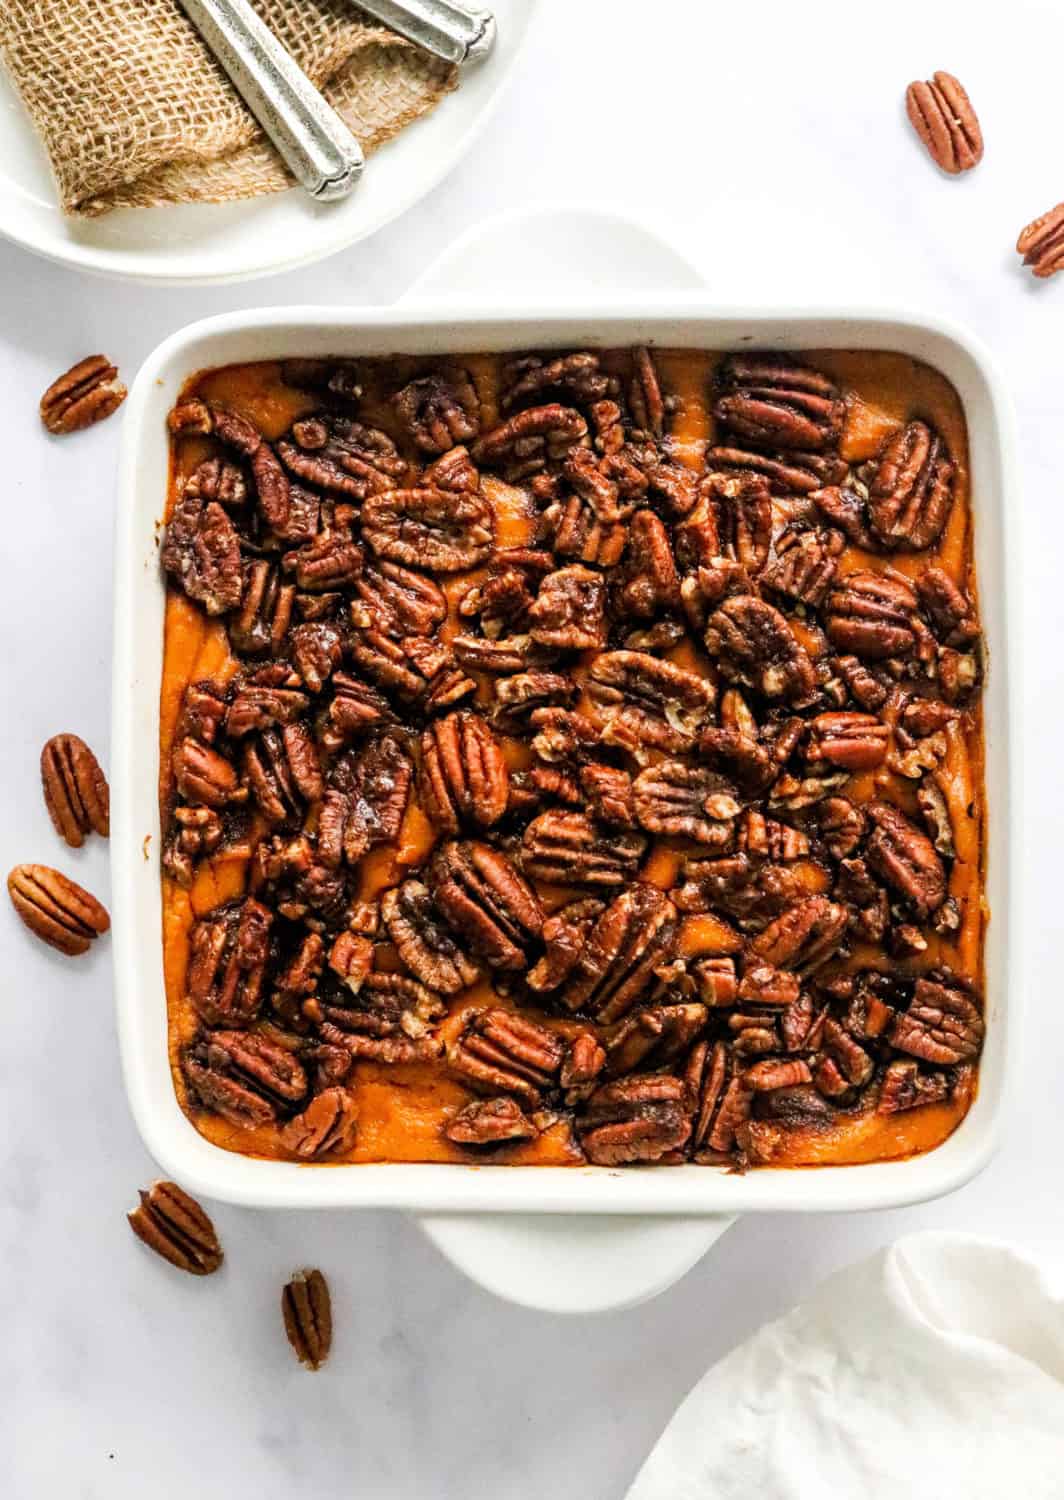 Healthy Sweet Potato Casserole With Pecan Crumble - Pinch Me Good